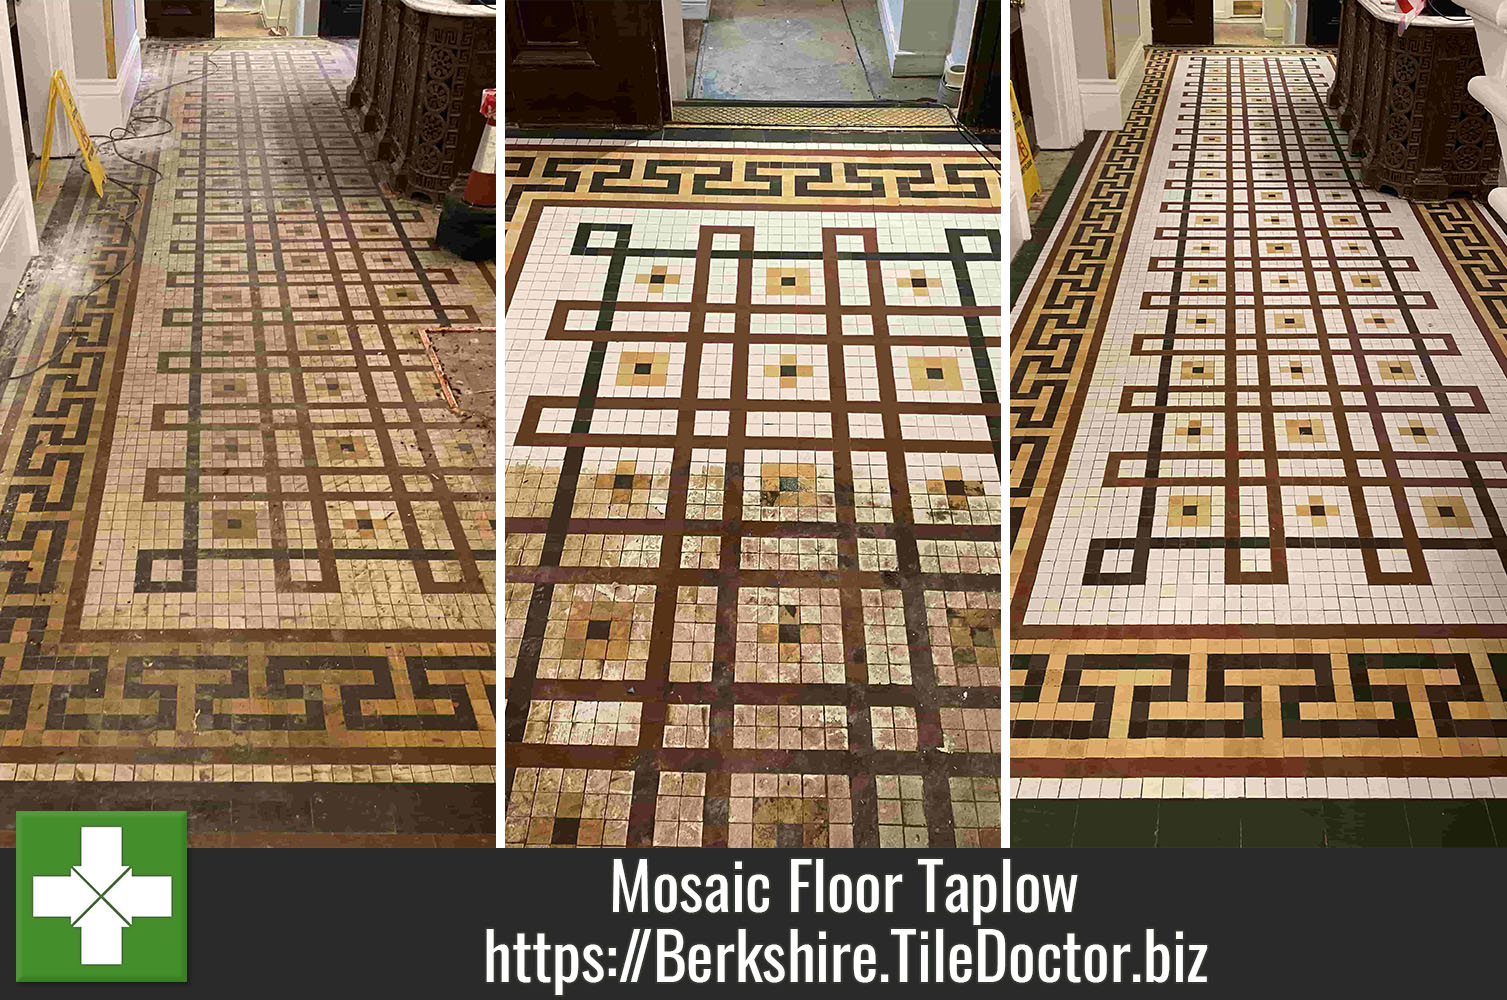 Removing Carpet Adhesive with Remove and Go on a Mosaic Tiled Floor in Berkshire